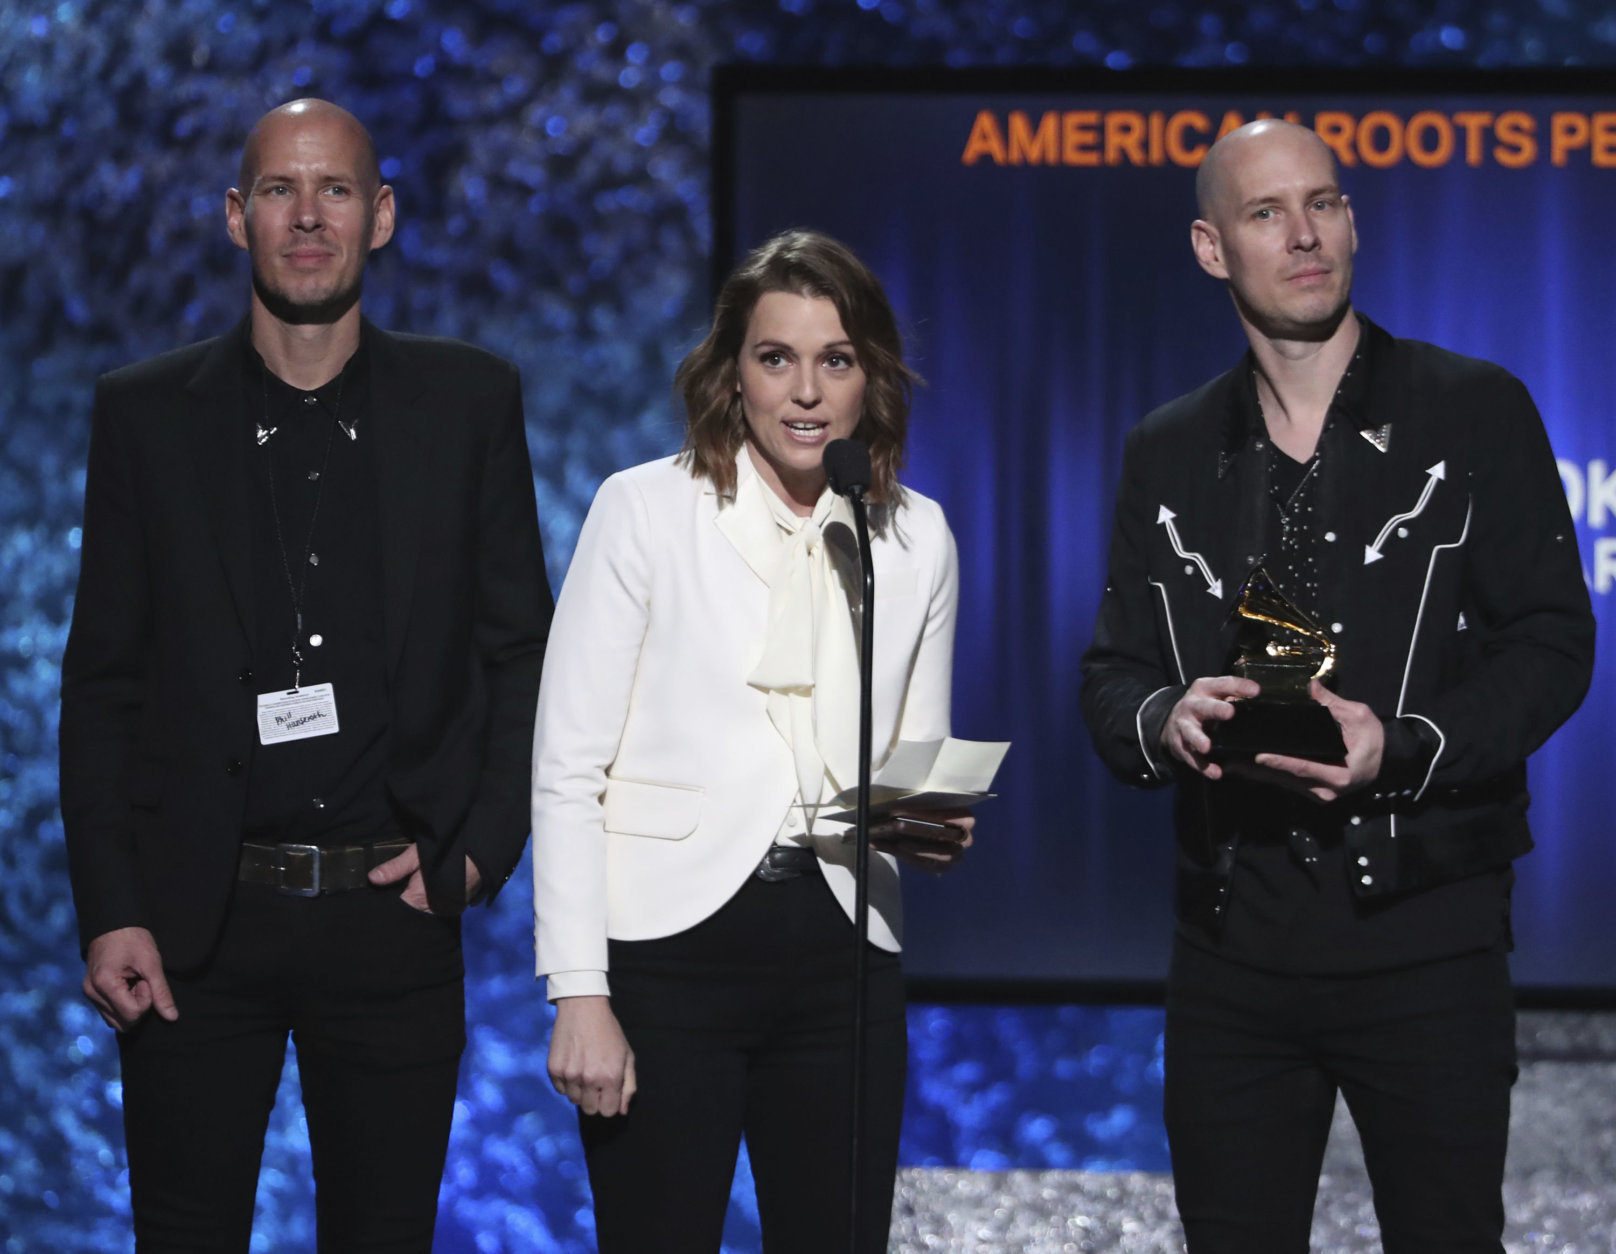 Phil Hanseroth, from left, Brandi Carlile and Tim Hanseroth accept the award for best American roots performance for "The Joke" at the 61st annual Grammy Awards on Sunday, Feb. 10, 2019, in Los Angeles. (Photo by Matt Sayles/Invision/AP)